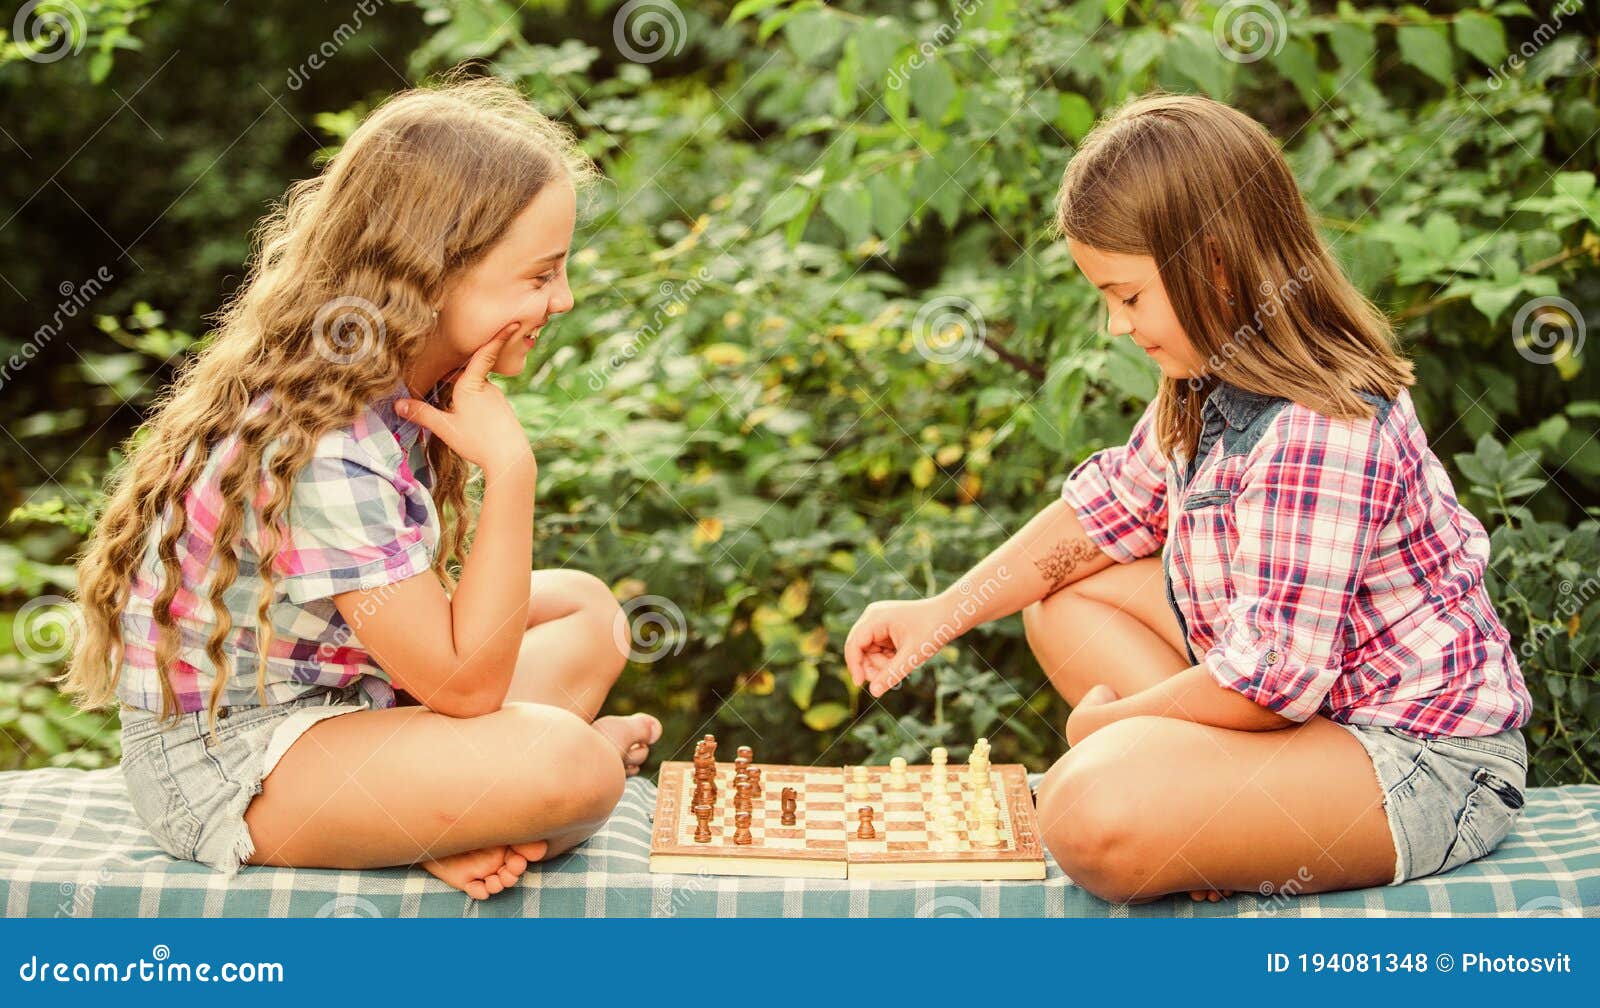 cognitive development. intellectual game. make decision. smart children. children play chess outdoors nature background